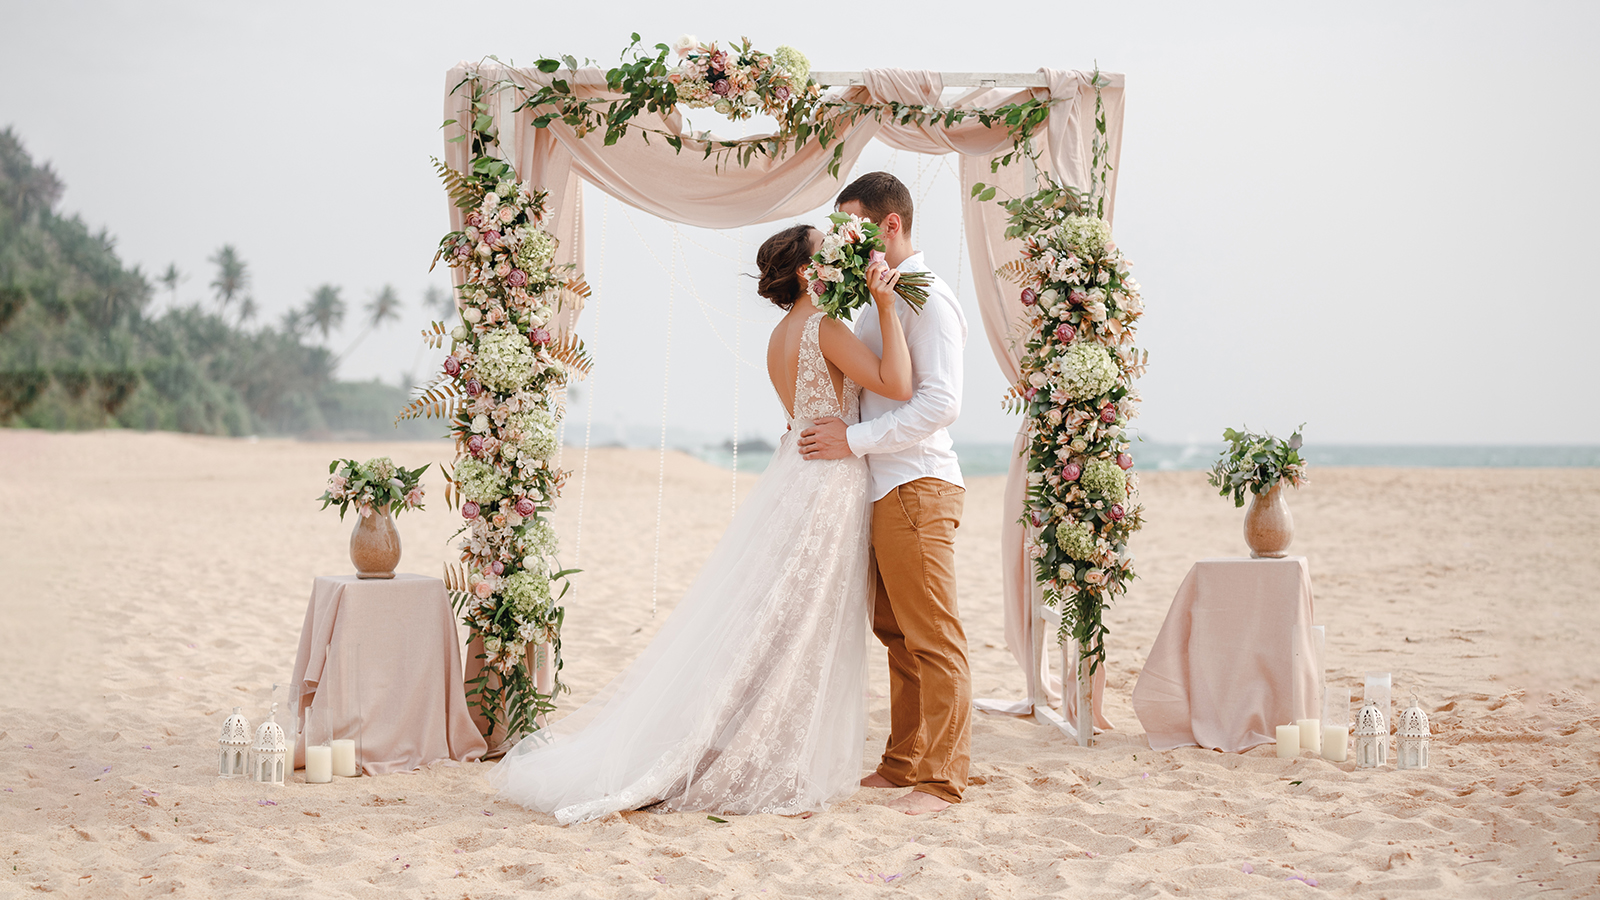 Bride and groom enjoying beach wedding in tropics, wedding arch, ocean background. Wedding ceremony on a tropical beach. Happy groom and beautiful bride kissing under the arch decorated with flowers